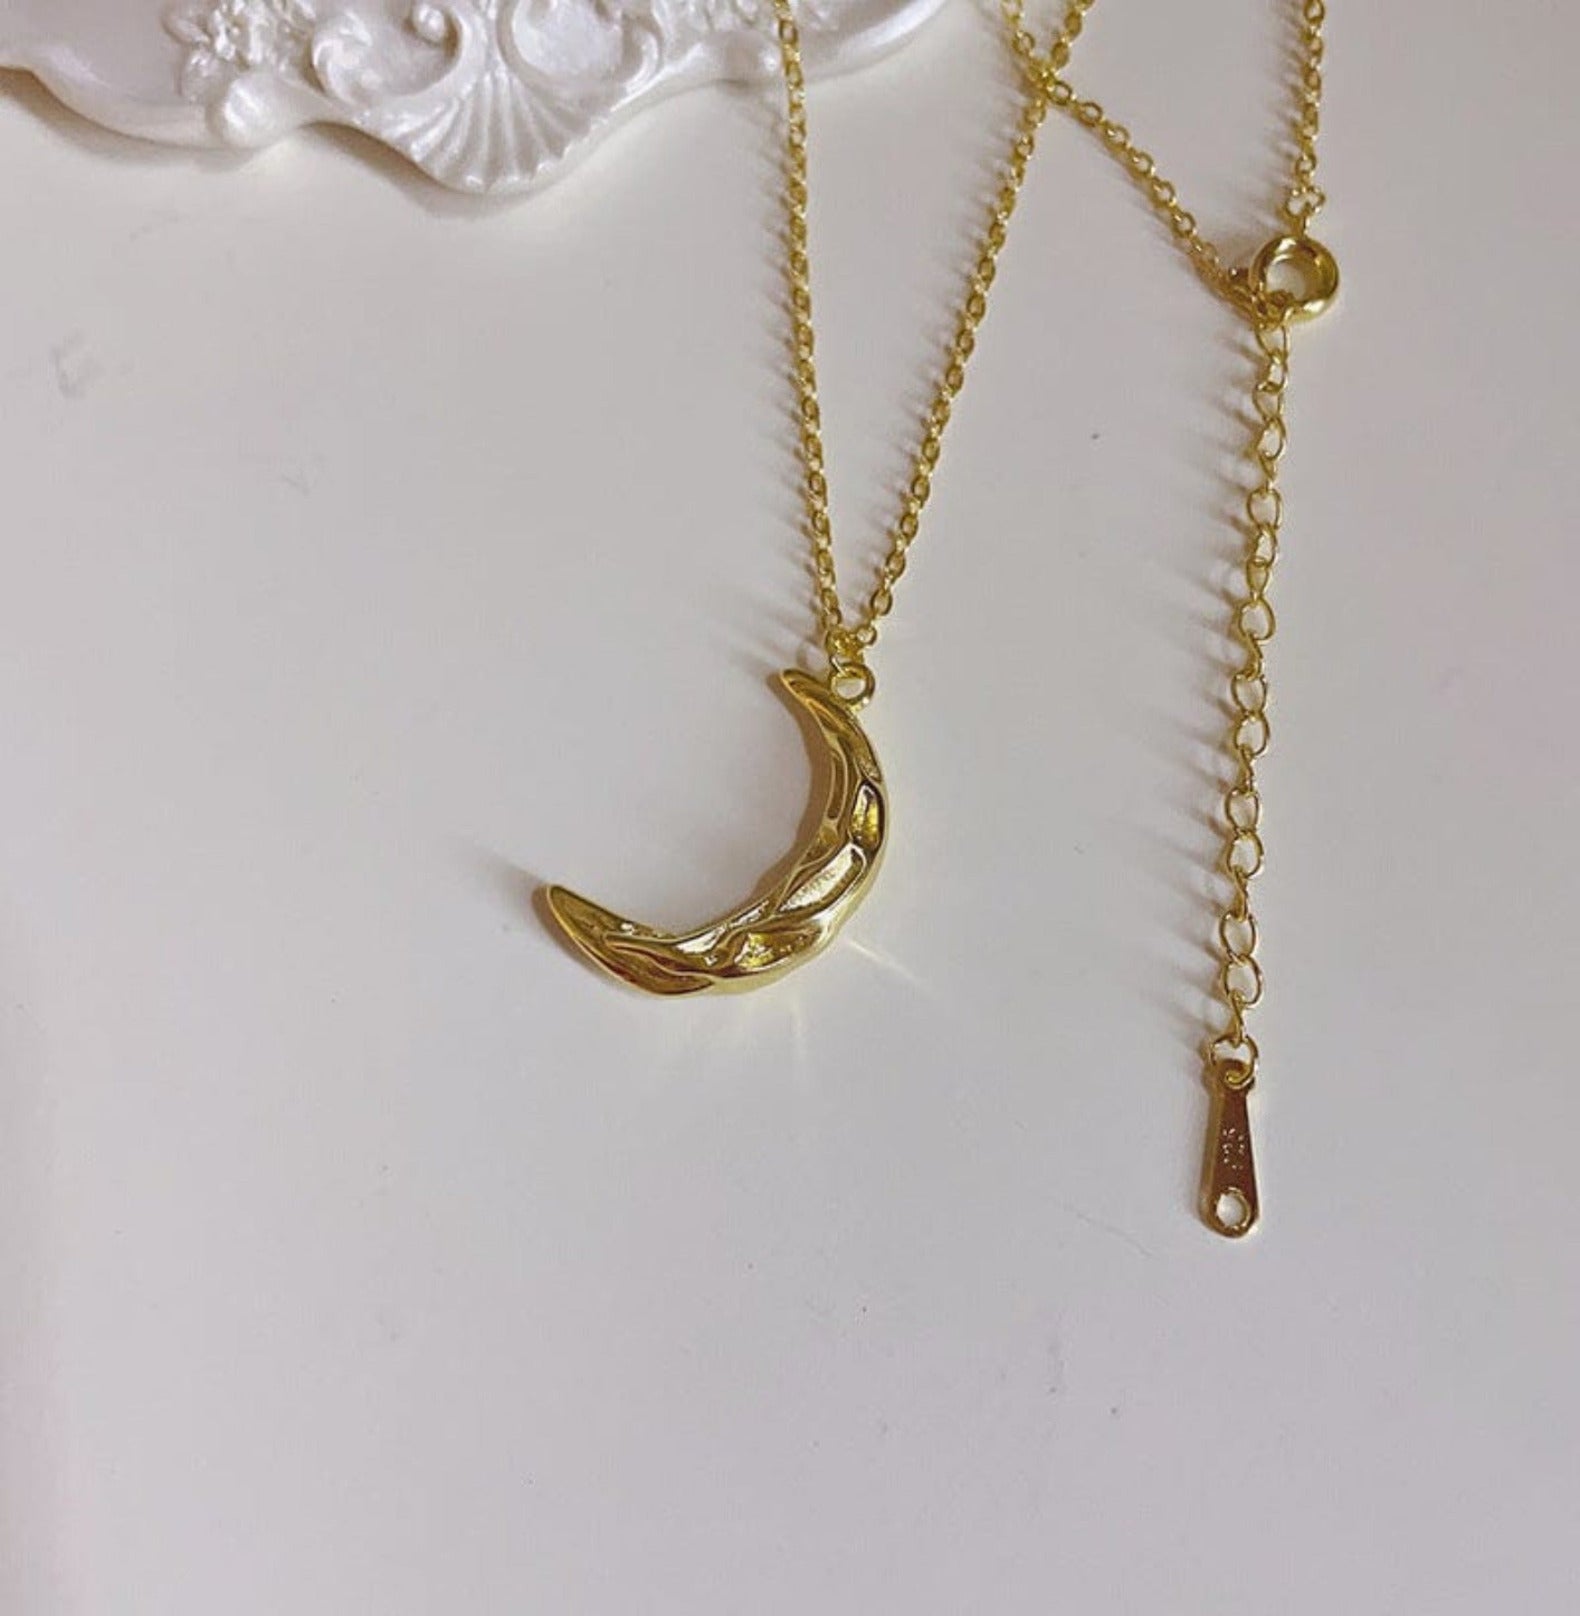 MOON CHARM NECKLACE neck Yubama Jewelry Online Store - The Elegant Designs of Gold and Silver ! 